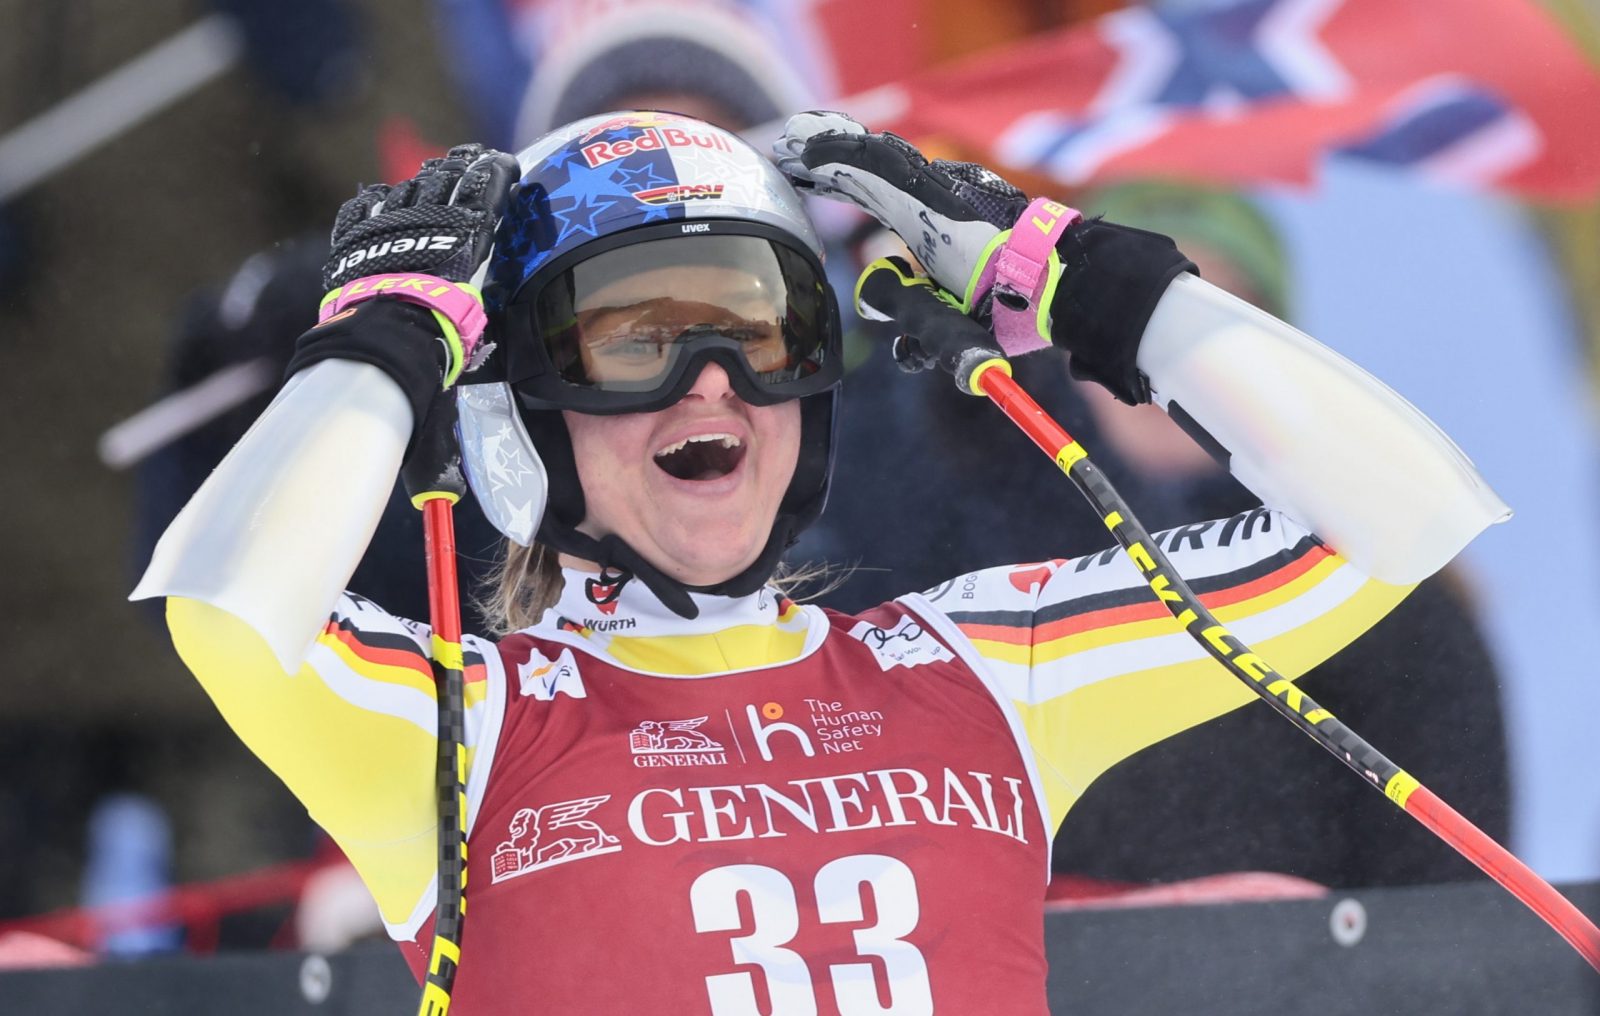 epa10504369 Emma Aicher from Germany reacts in the finish area during the Women's Super G race at the FIS Alpine Skiing World Cup in Kvitfjell, Norway, 05 March 2023.  EPA/Geir Olsen  NORWAY OUT